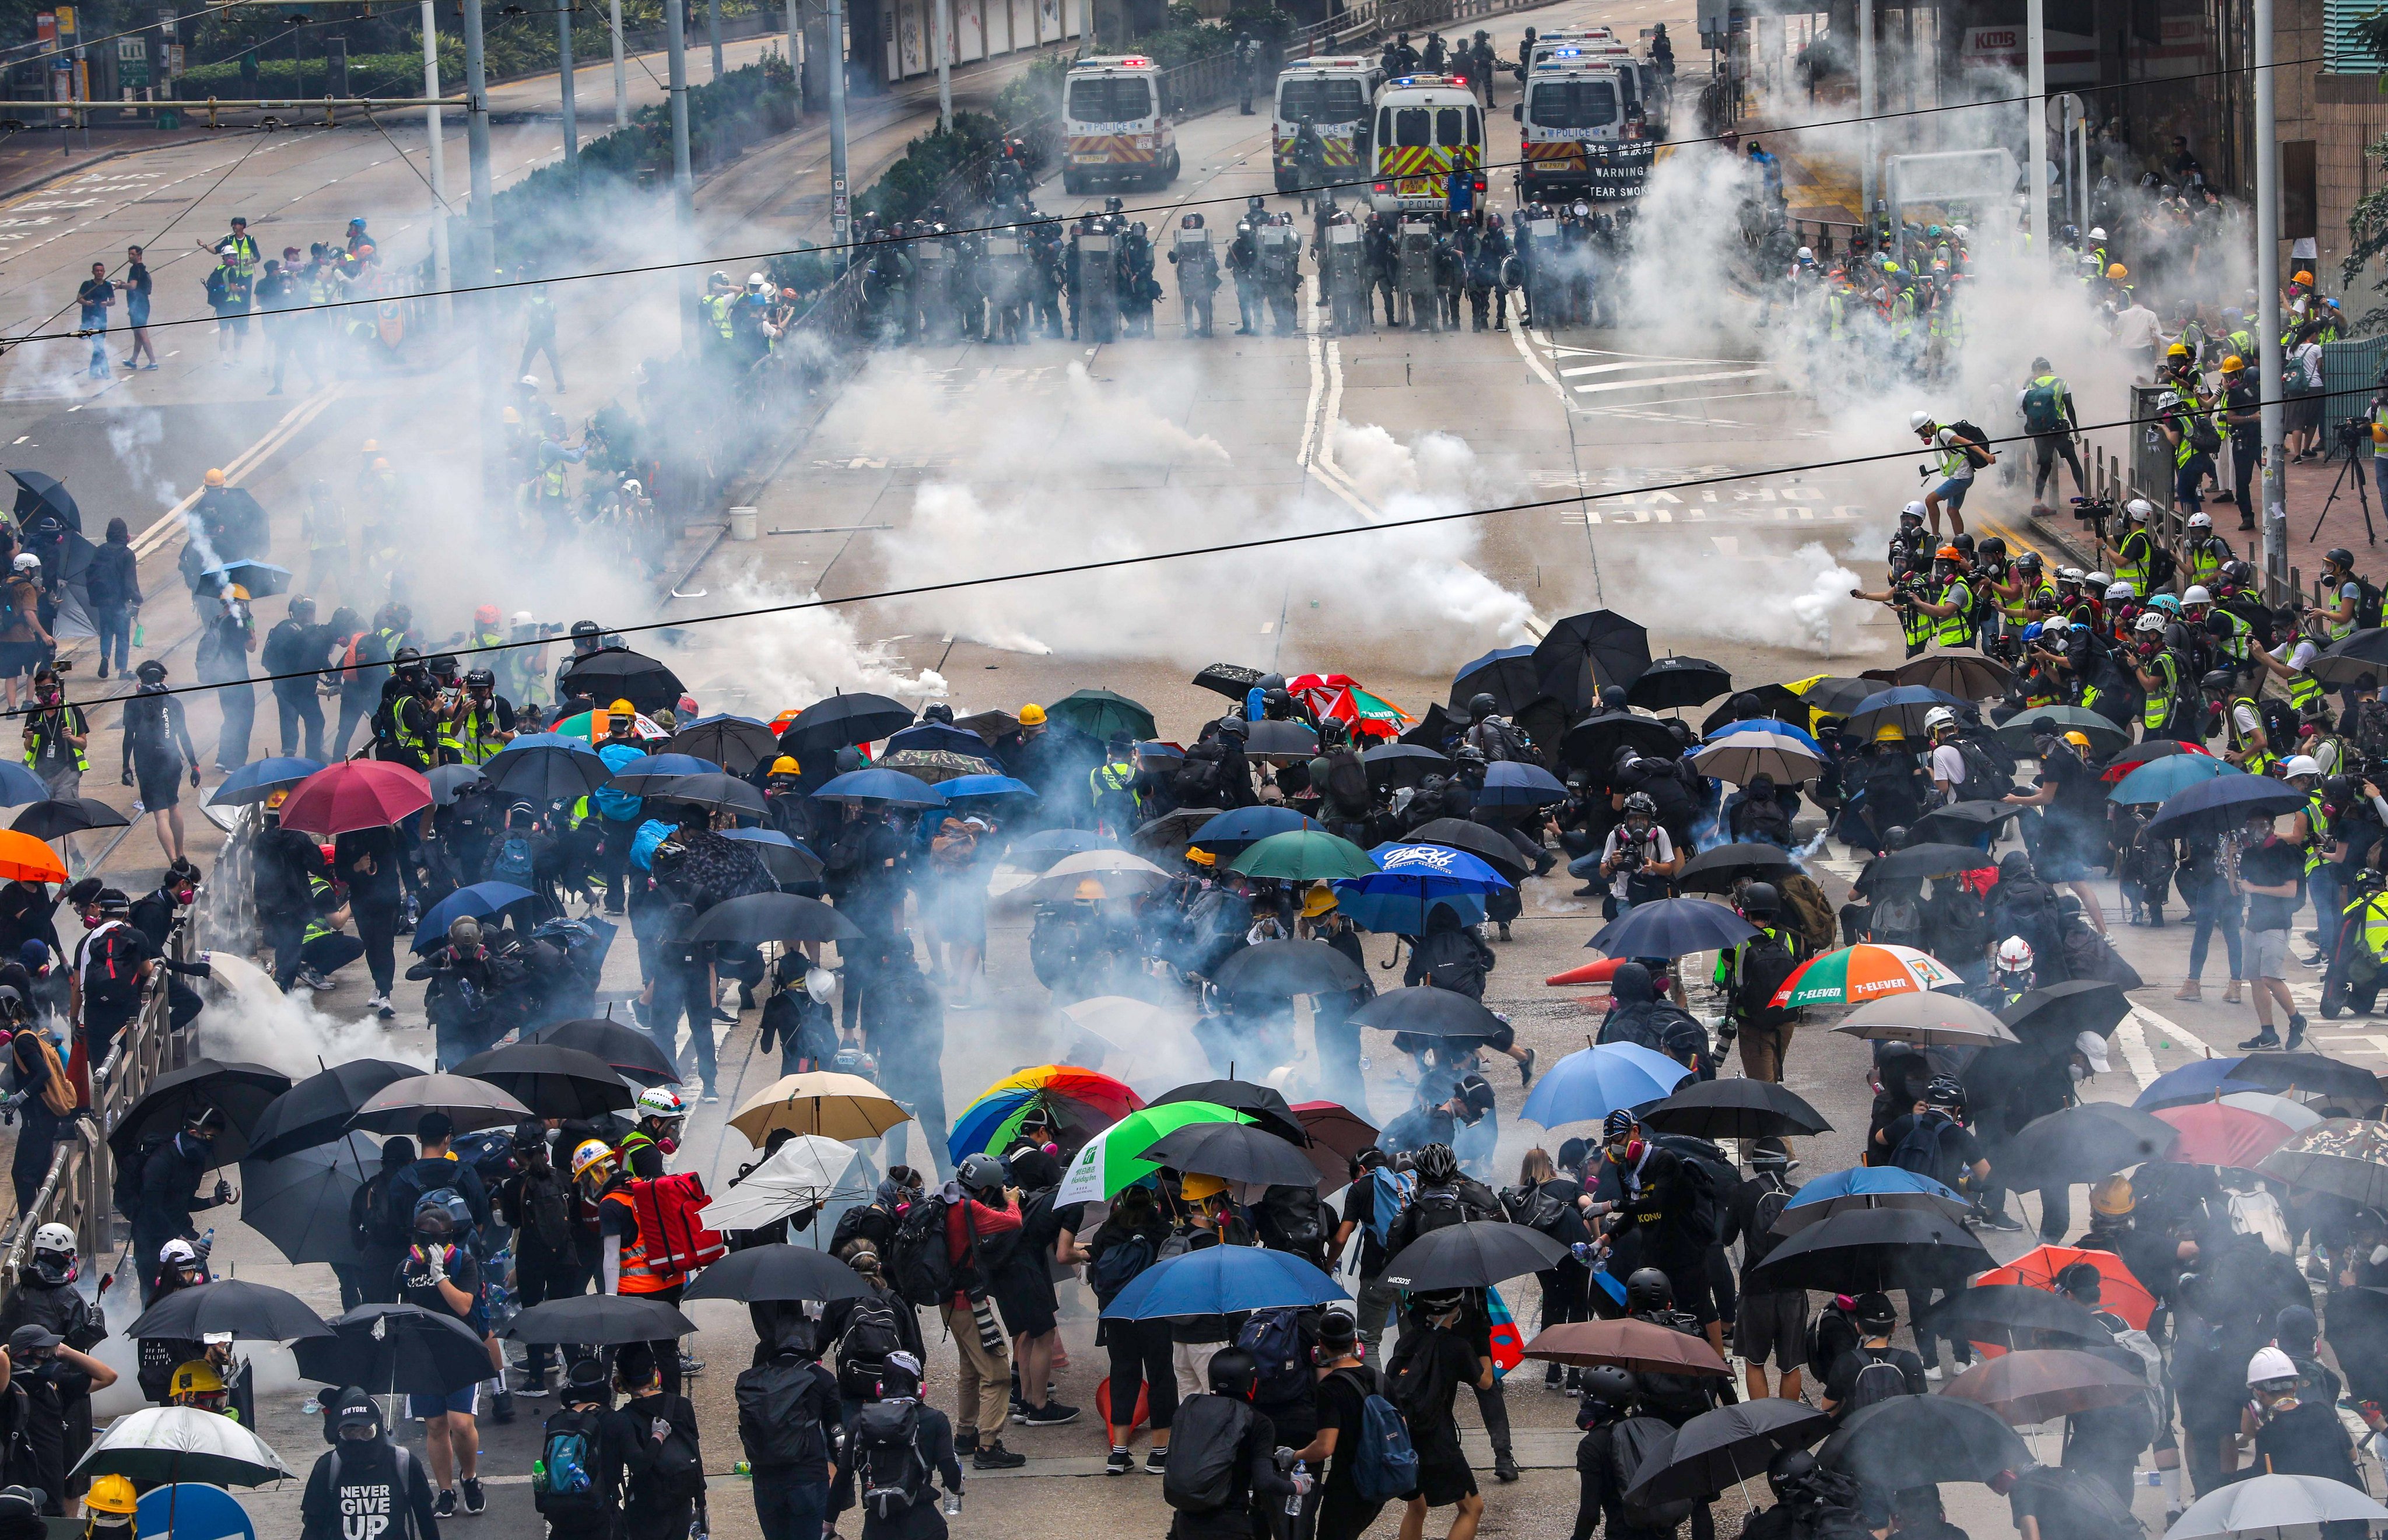 Police and protesters clash during a protest in 2019. Photo: Dickson Lee